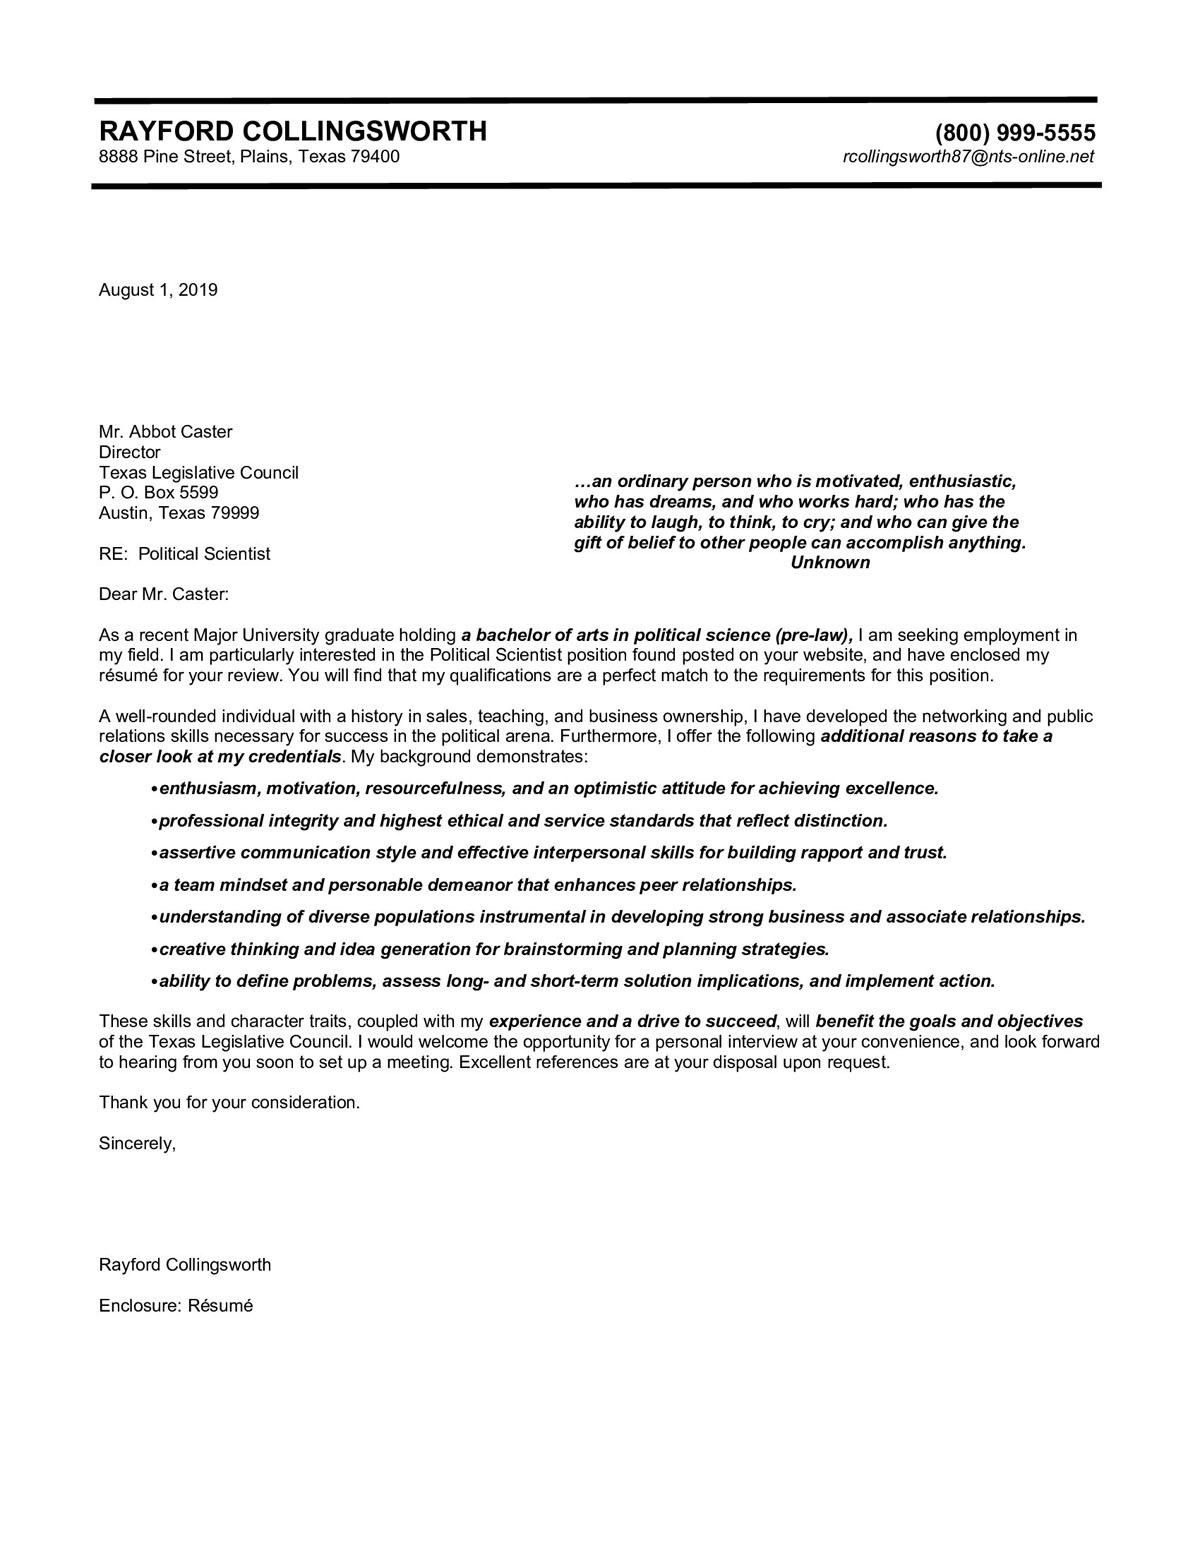 Sample cover letter: Political Science, Entry Level, Response to Ad